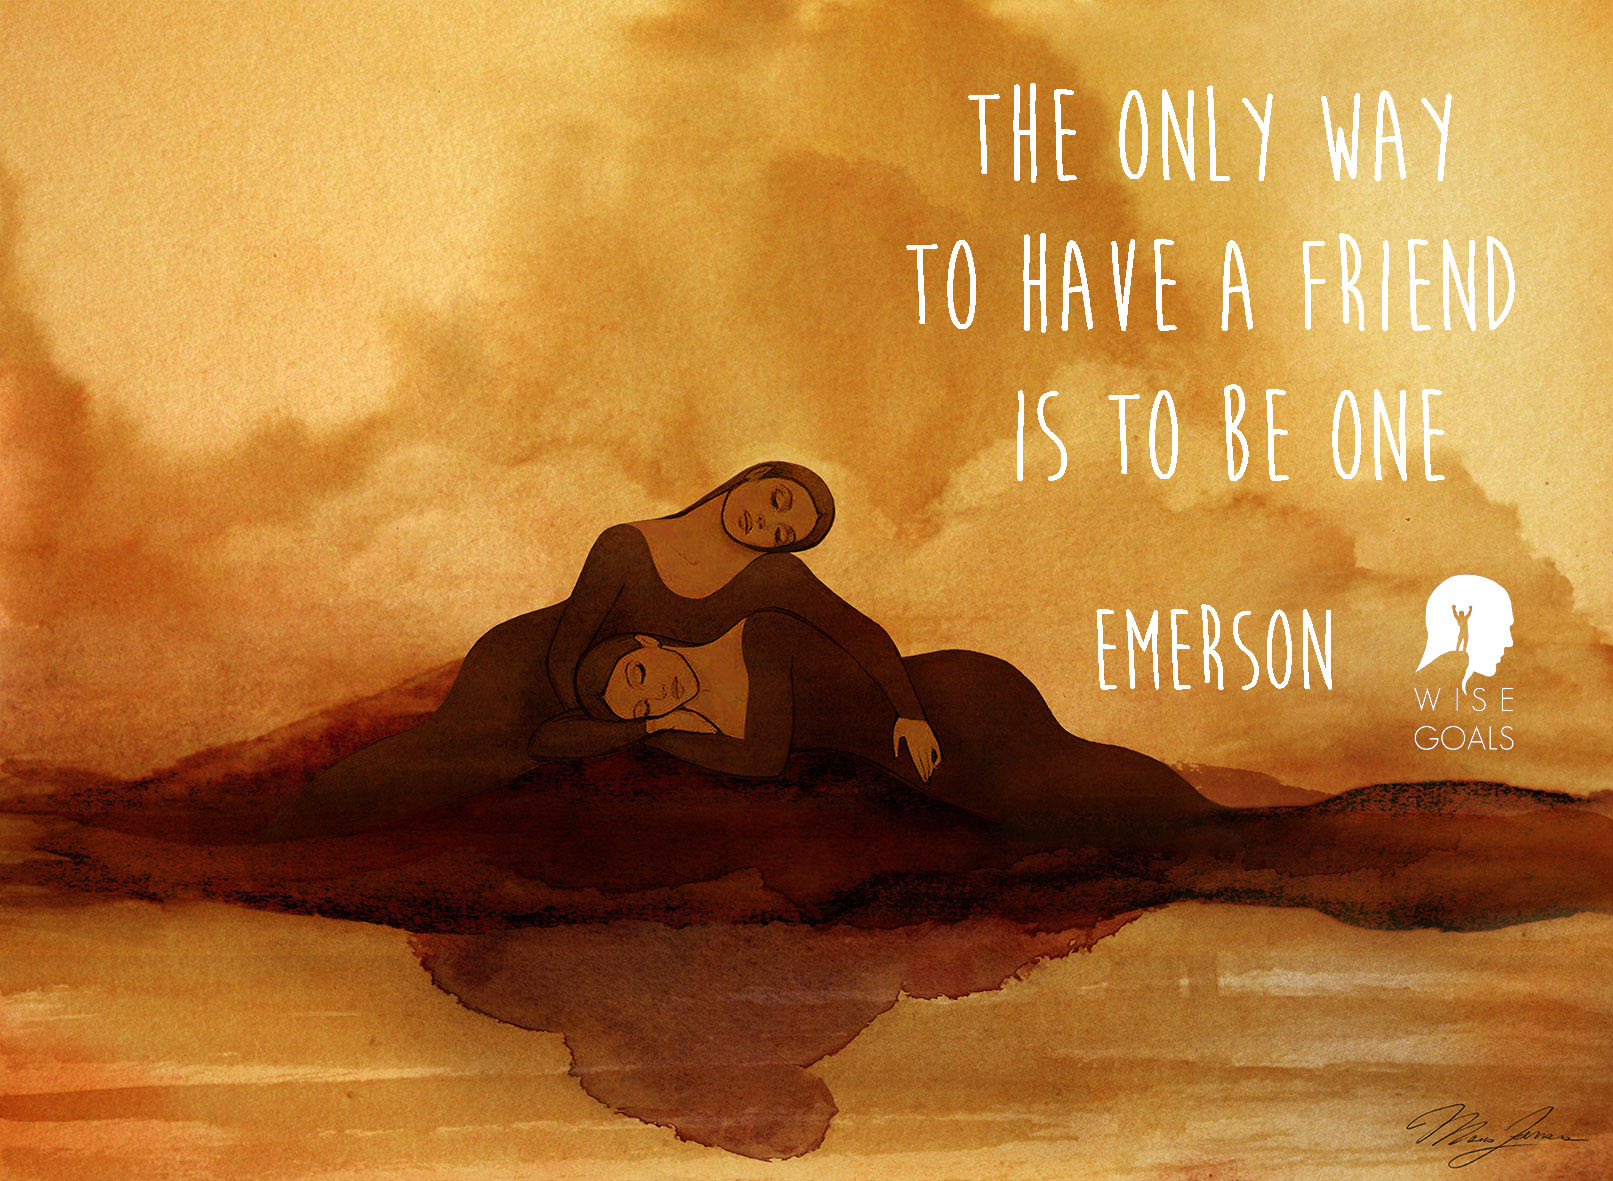 Emerson quote with beautiful artwork